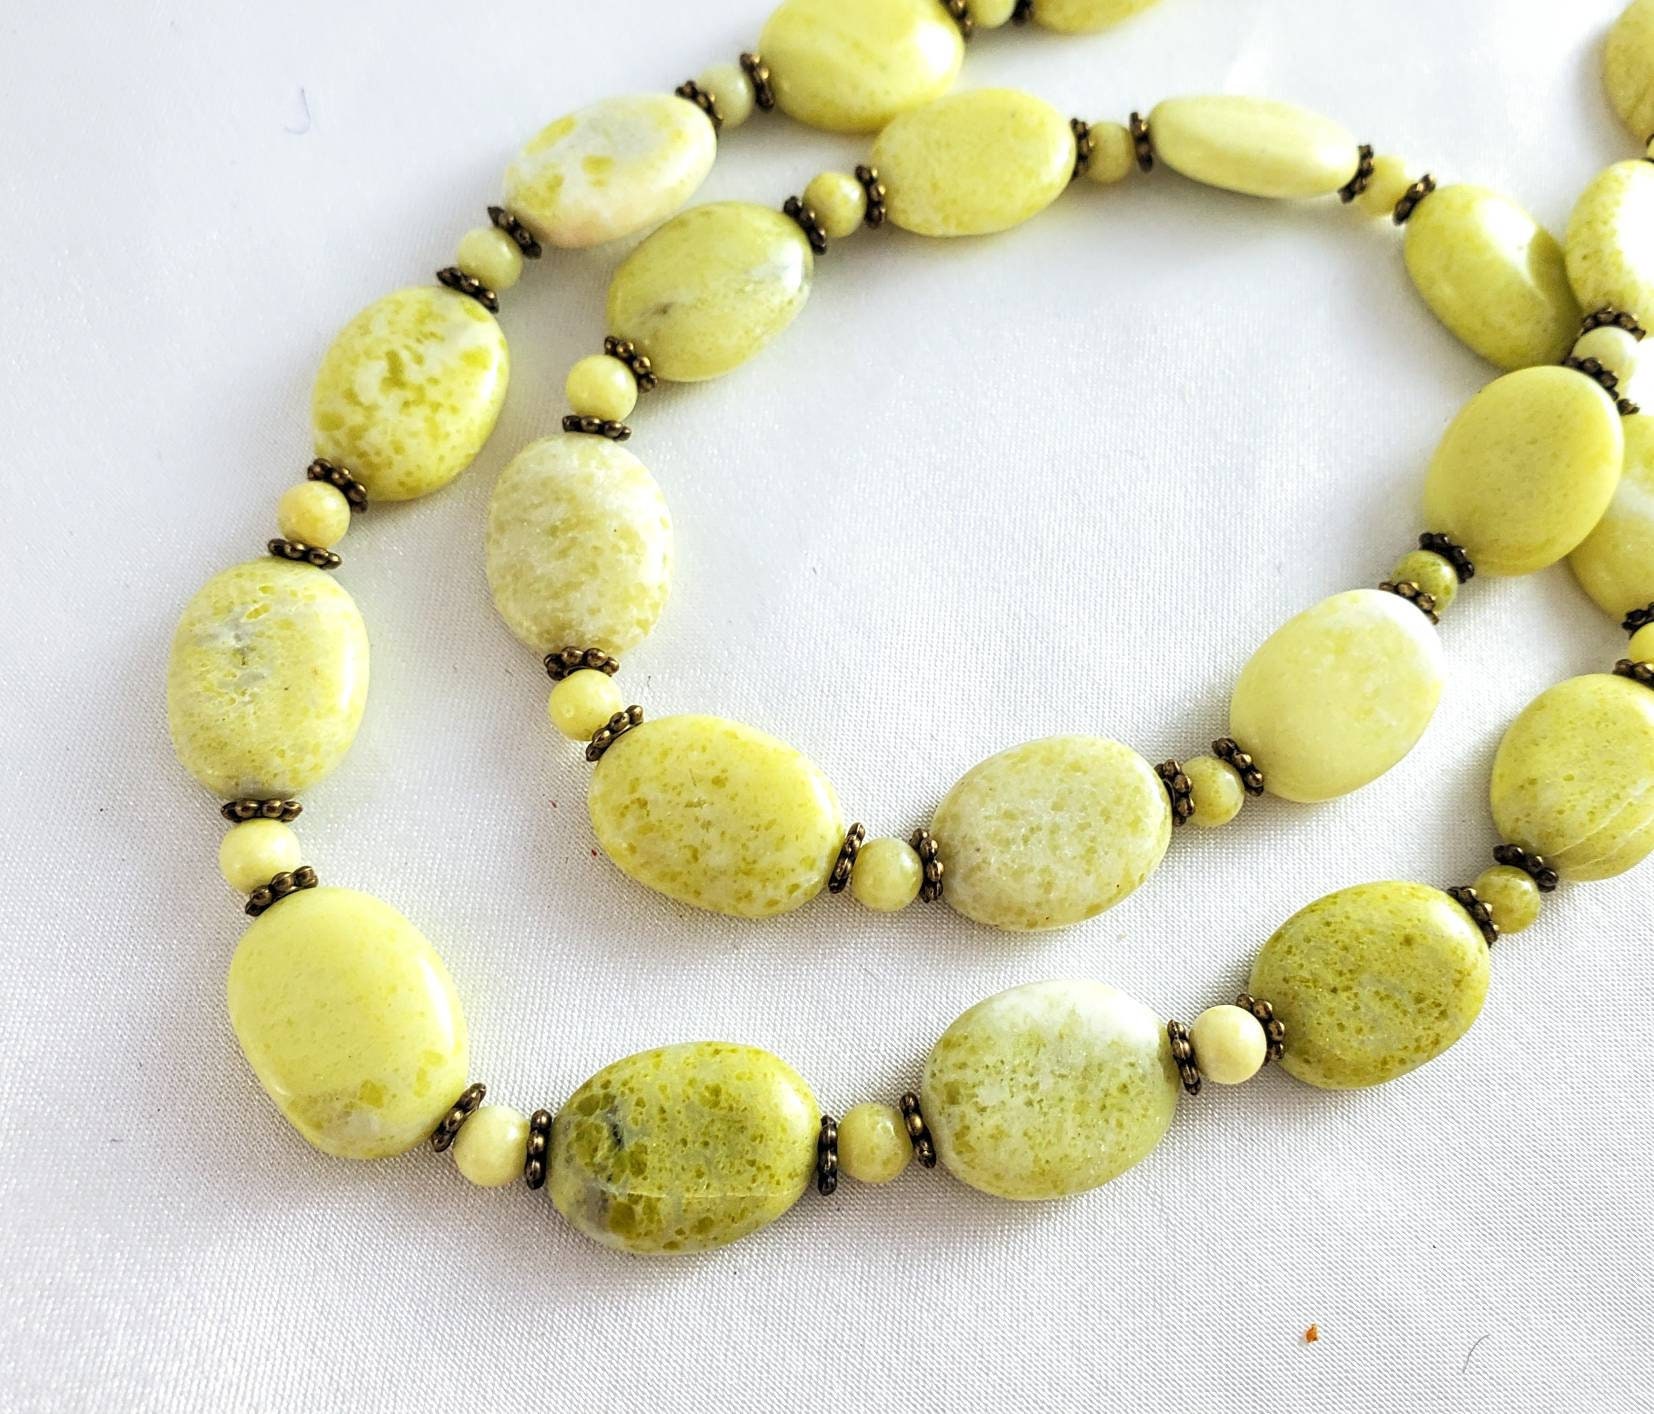 Lemon-lime "jade" Serpentine Necklace | Natural Neon Green Oval Gemstones | 24" Long Statement Jewelry |